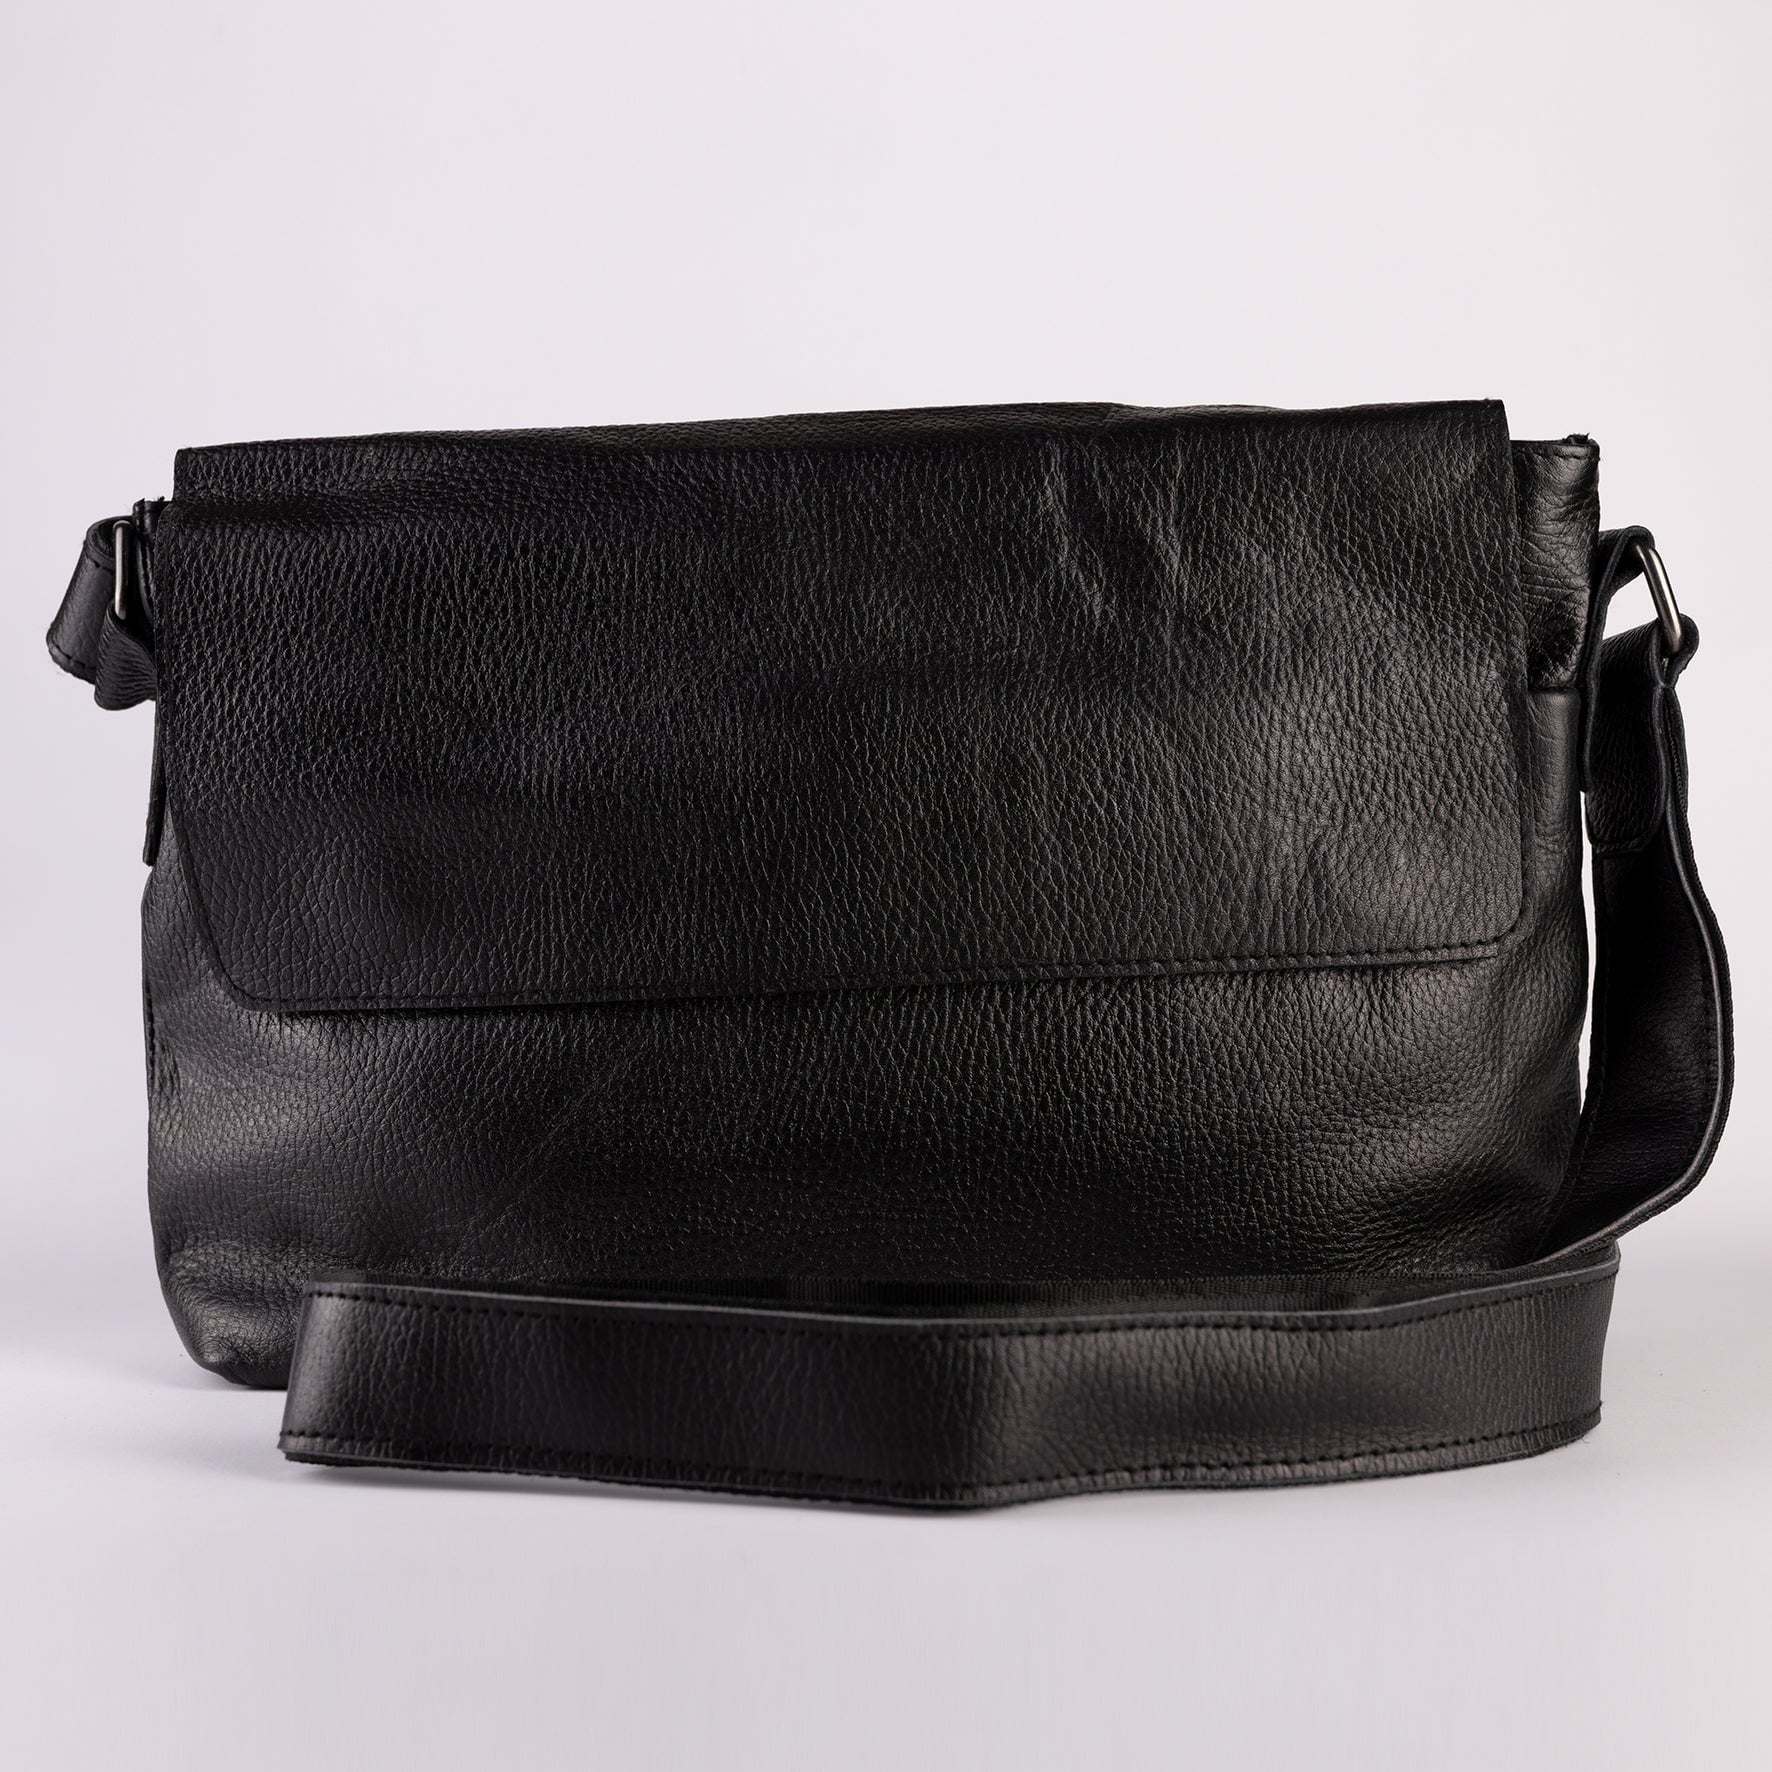 Leather Everyday Bag - Hatchill